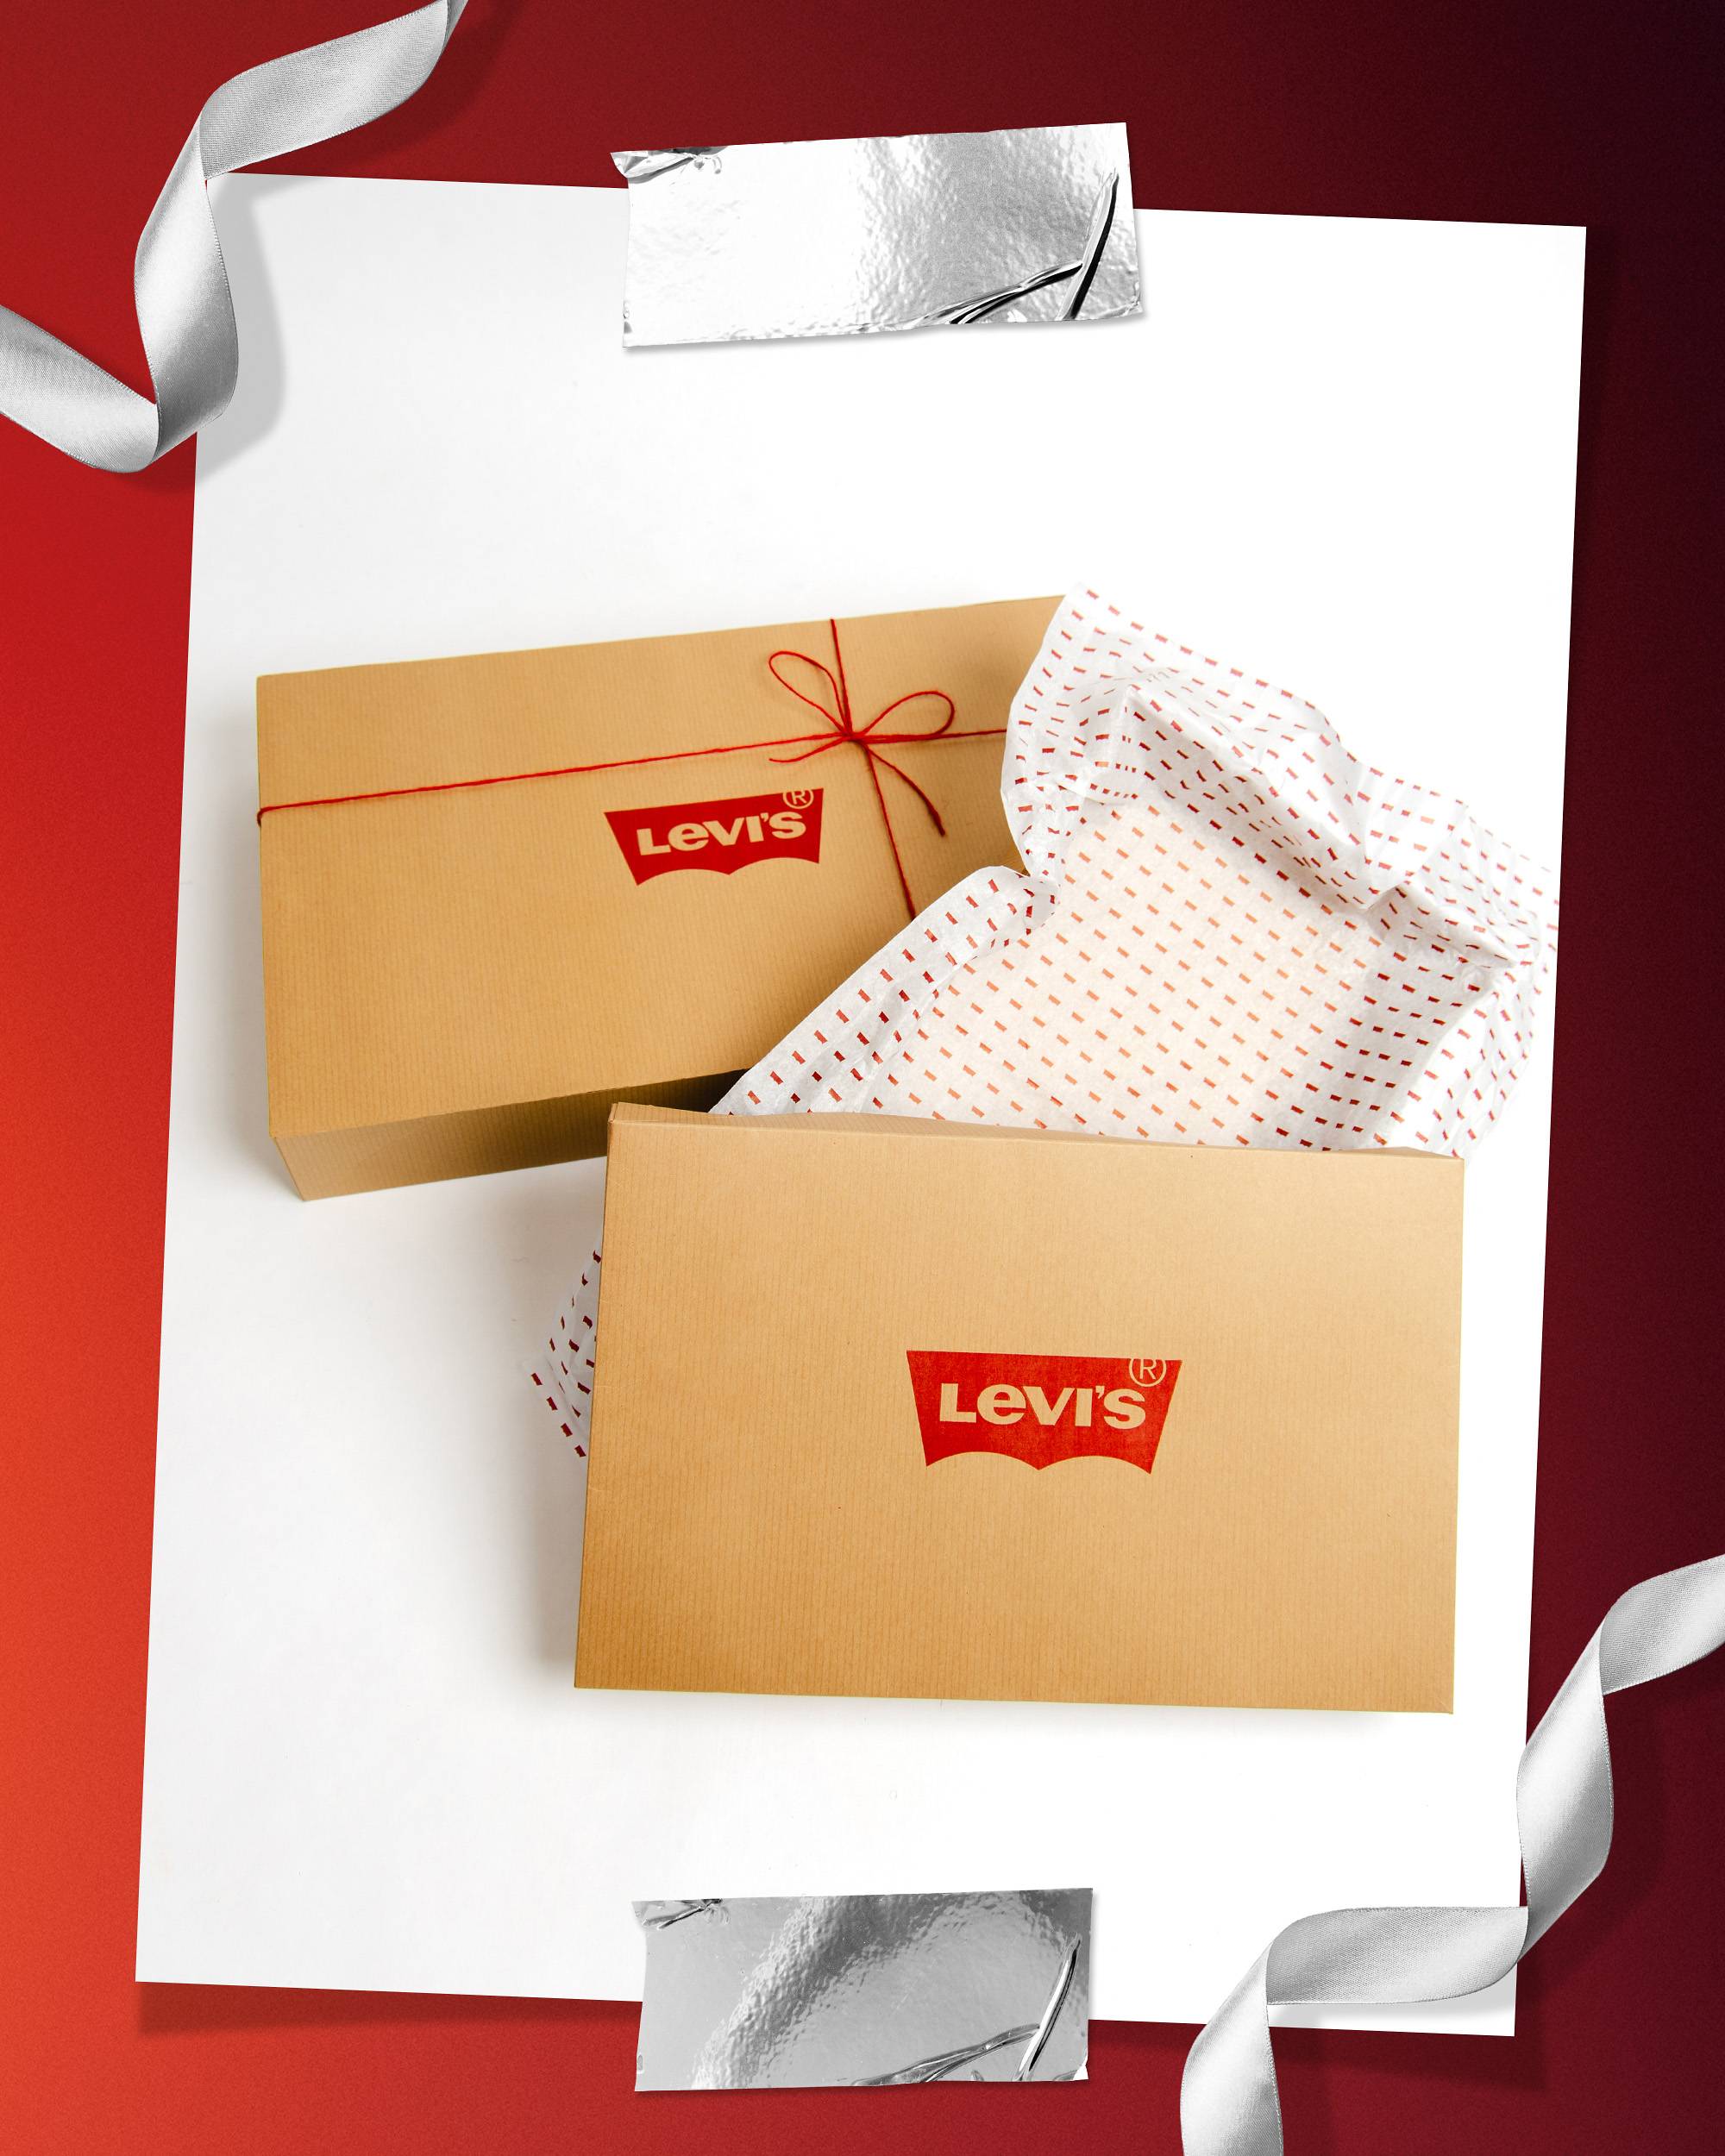 Image of Levi's gift boxes